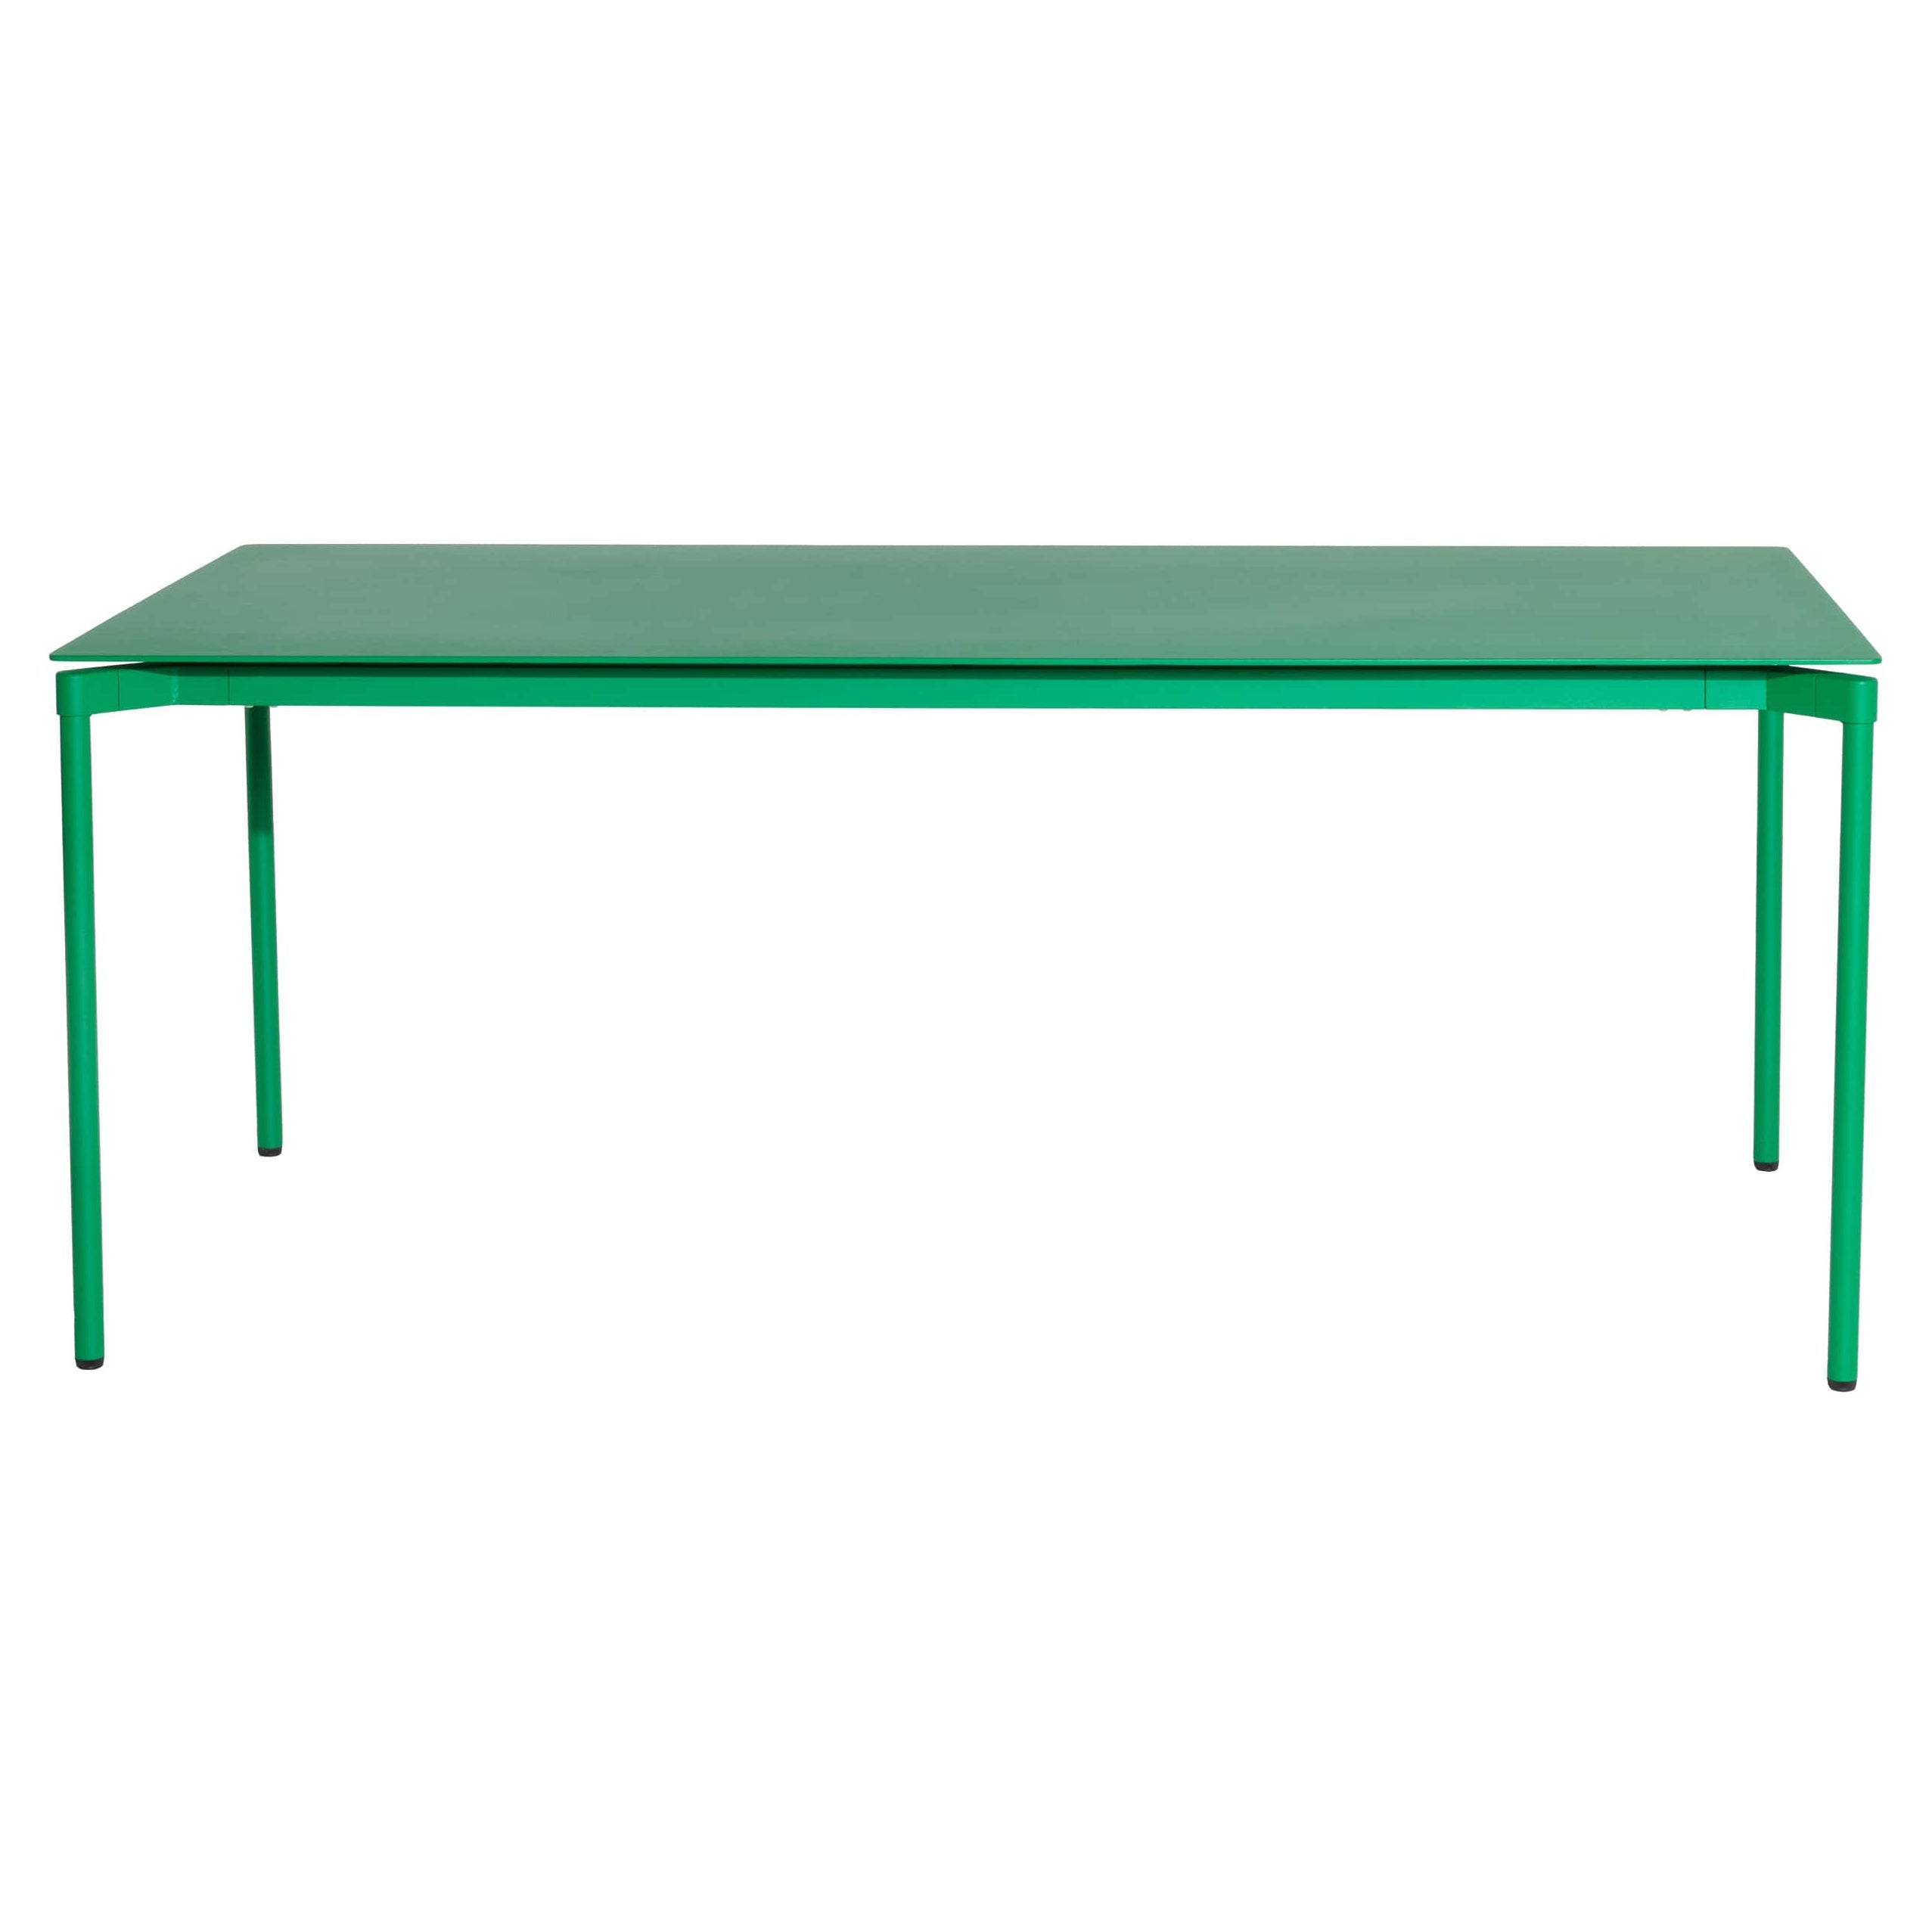 Petite Friture Fromme Rectangular Table in Mint-Green Aluminium by Tom Chung